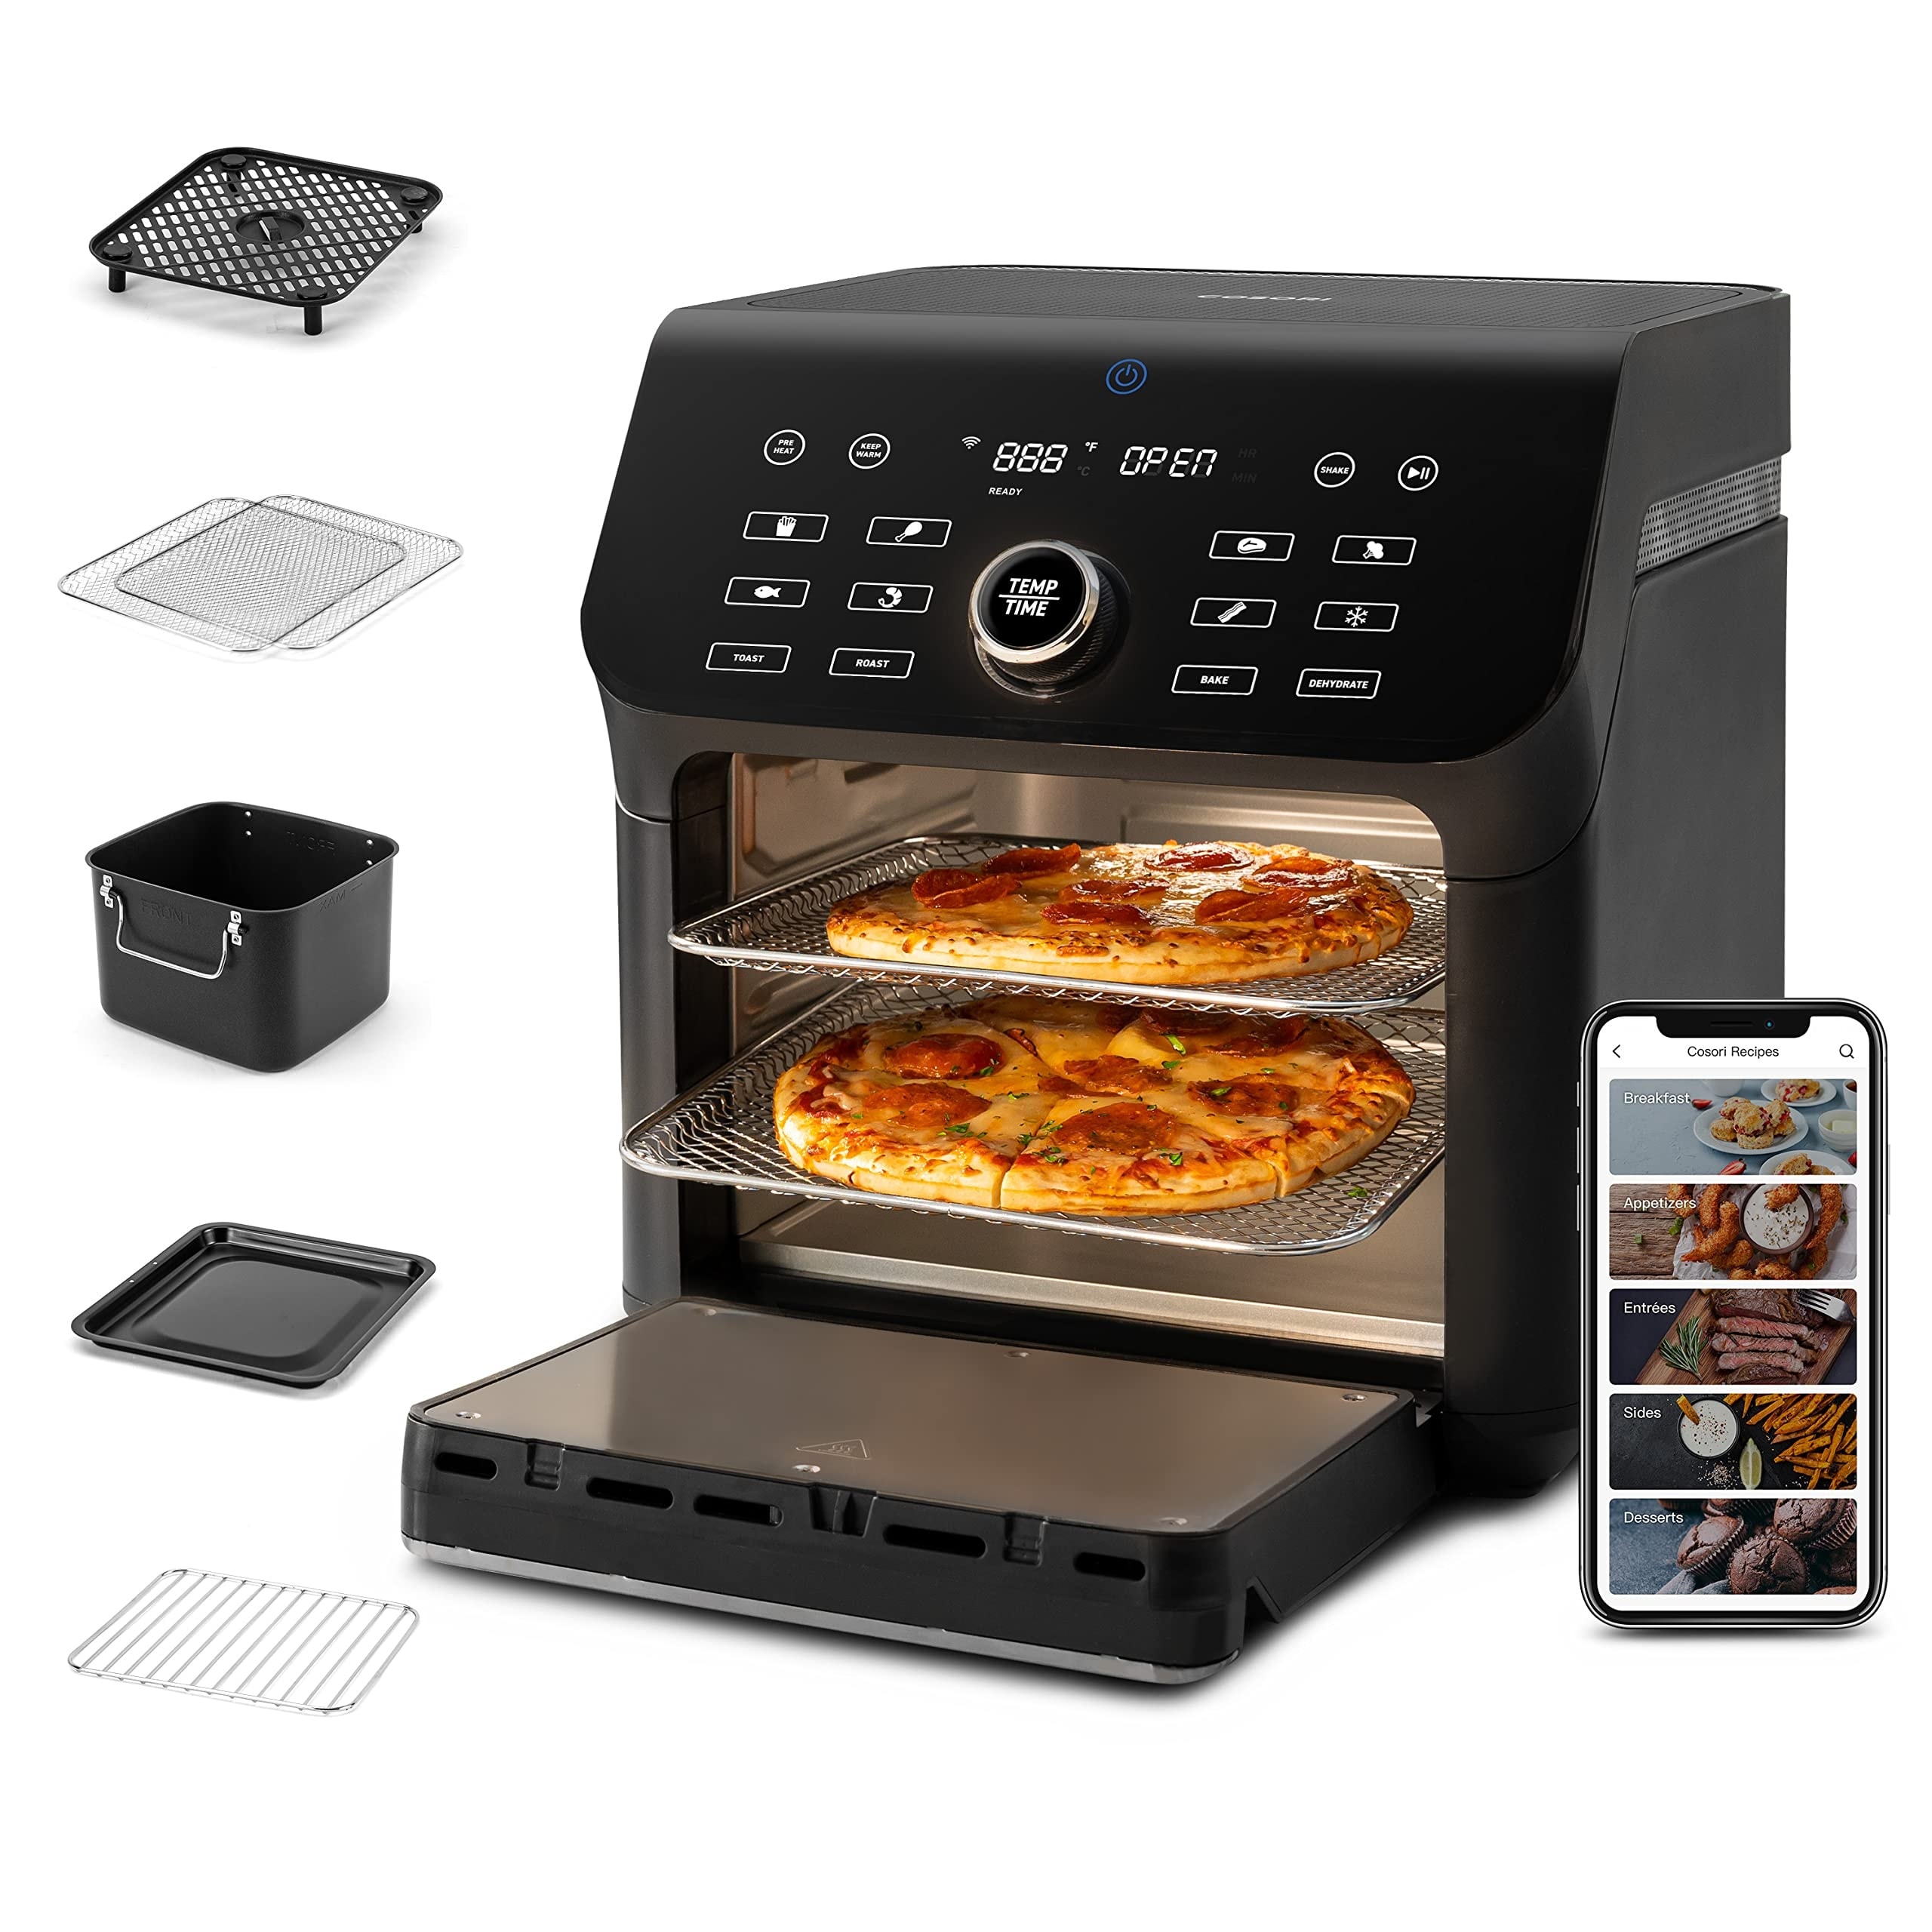 https://ak1.ostkcdn.com/images/products/is/images/direct/afdcd067e50d41e75077b98a1dbaff168373e9cd/Air-Fryer-Toaster-Oven-Combo%2C-10-Qt-Family-Size-14-in-1-Functions-%281000%2B-APP-Recipes%29%2C-Dishwasher-Safe-Accessories.jpg